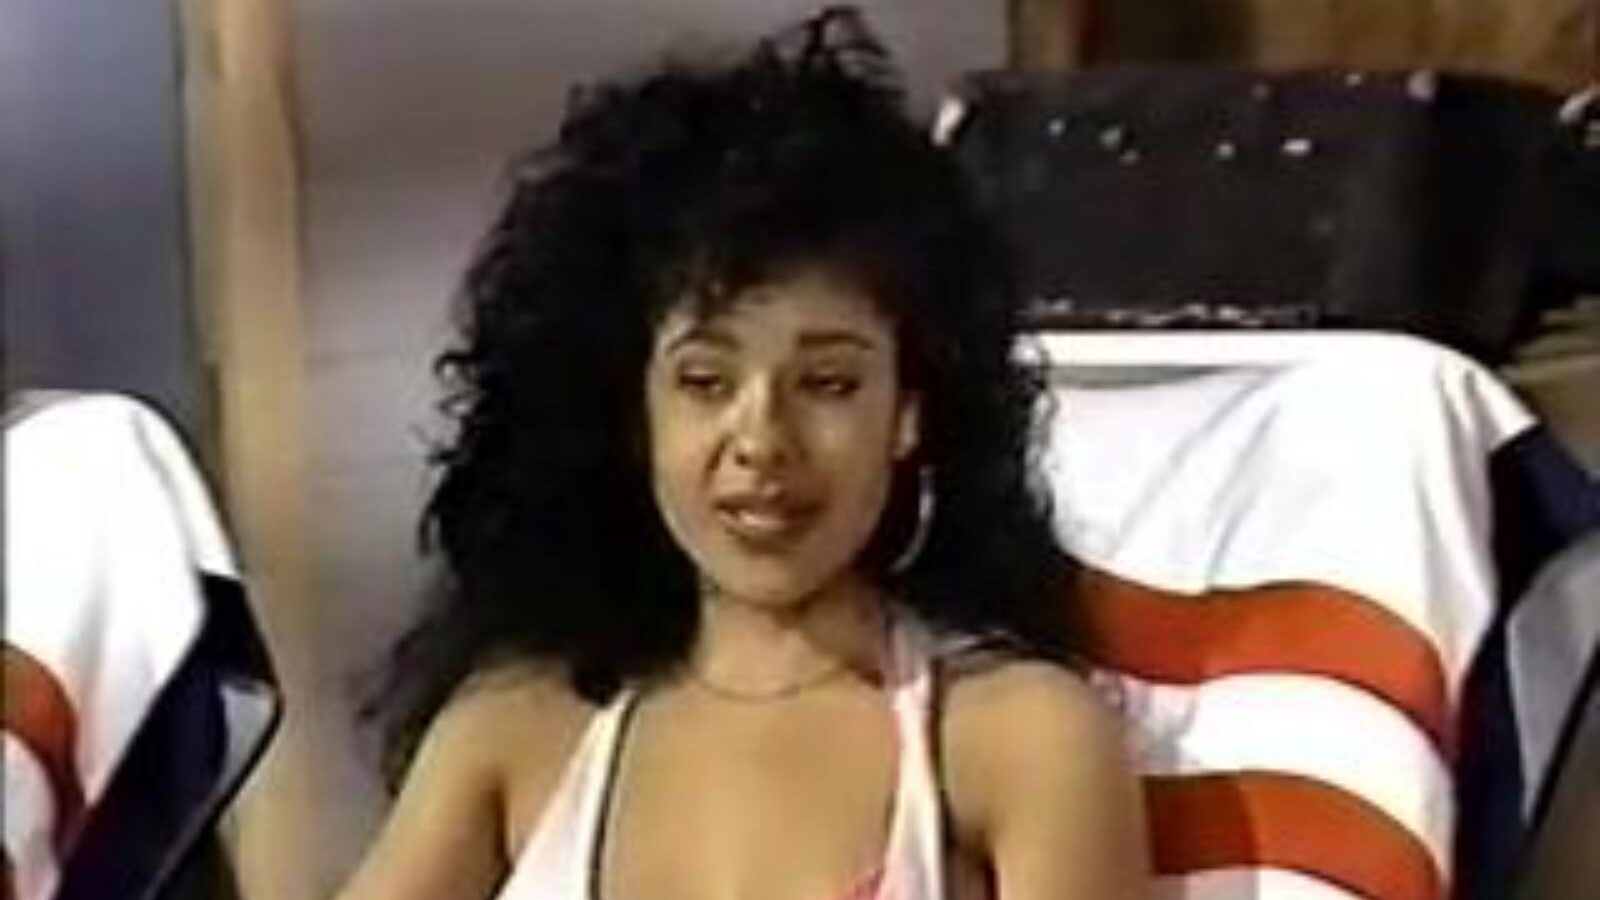 Retro Usa 693 90s: Free 1992 Porn Video 0c - xHamster Watch Retro Usa 693 90s tube hump movie scene for free on xHamster, with the sexiest bevy of 1992, 90s Retro, Free Usa & Usa Free pornography movie scenes